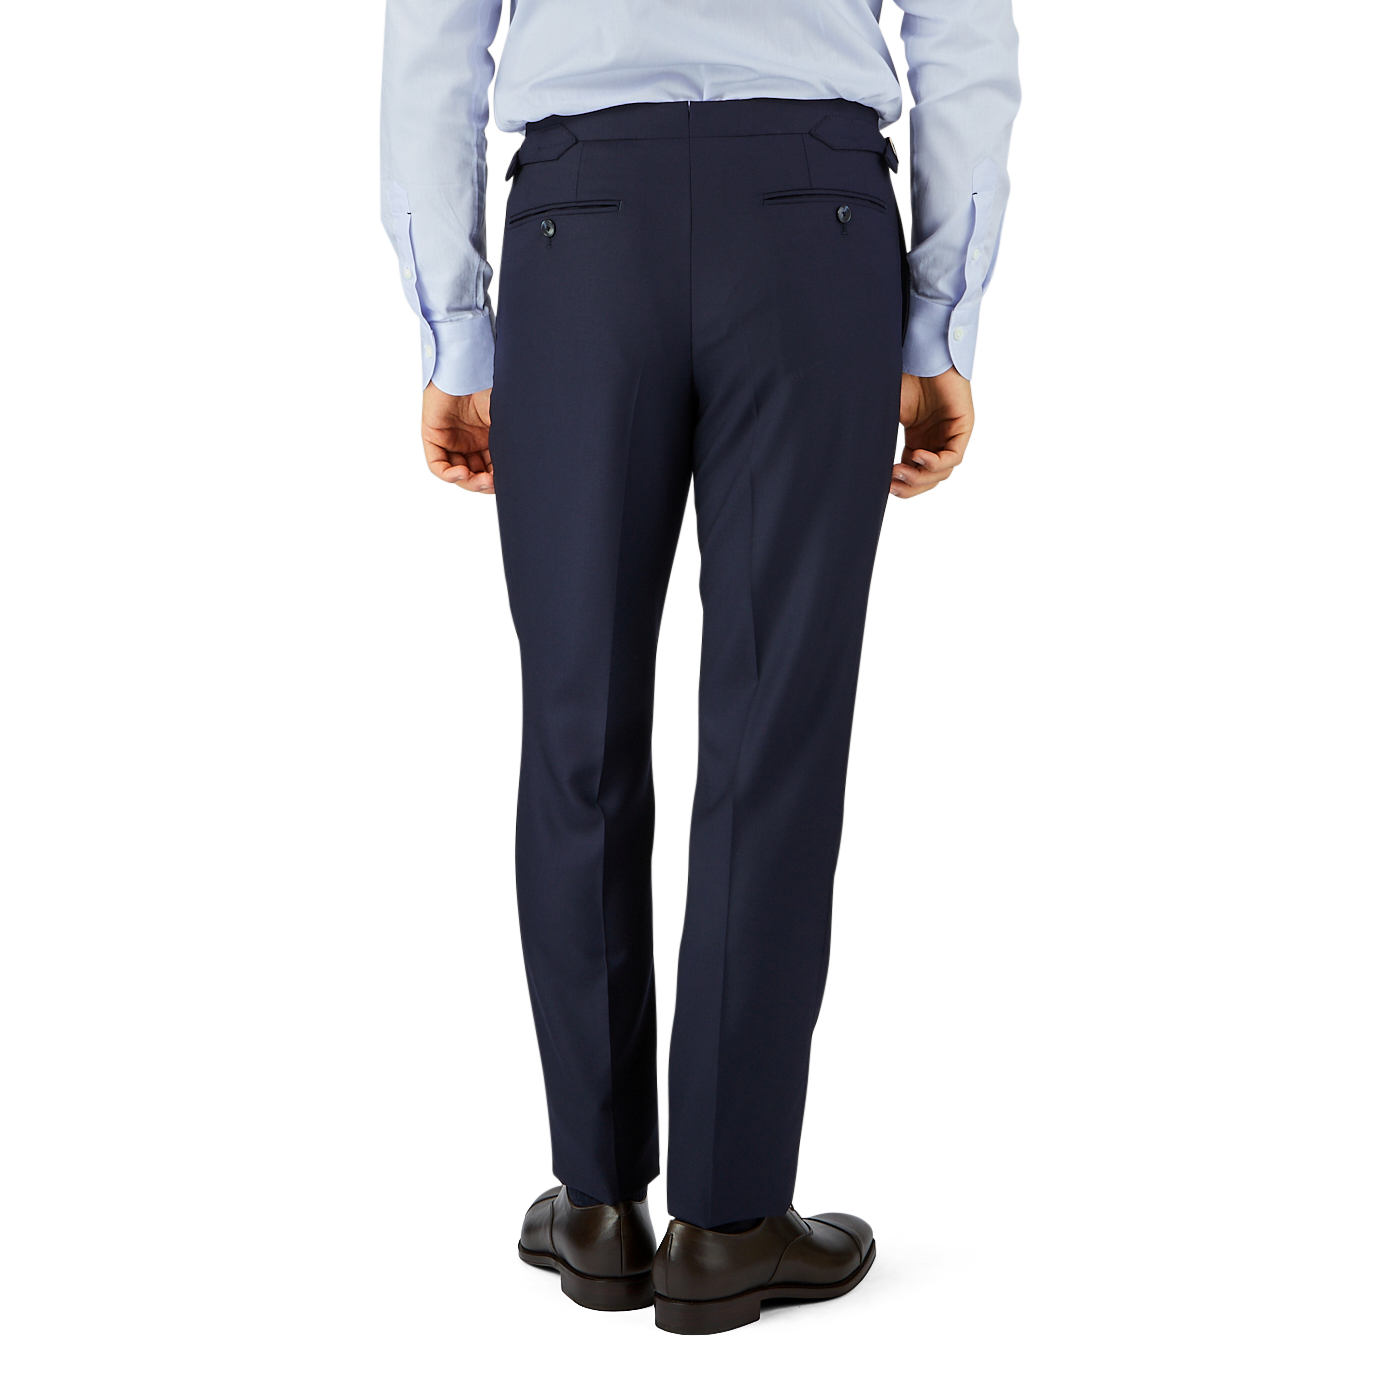 A man wearing a light blue shirt and Baltzar Sartorial Navy Super 100's Wool Flat Front Suit Trousers stands facing away from the camera, hands slightly raised.